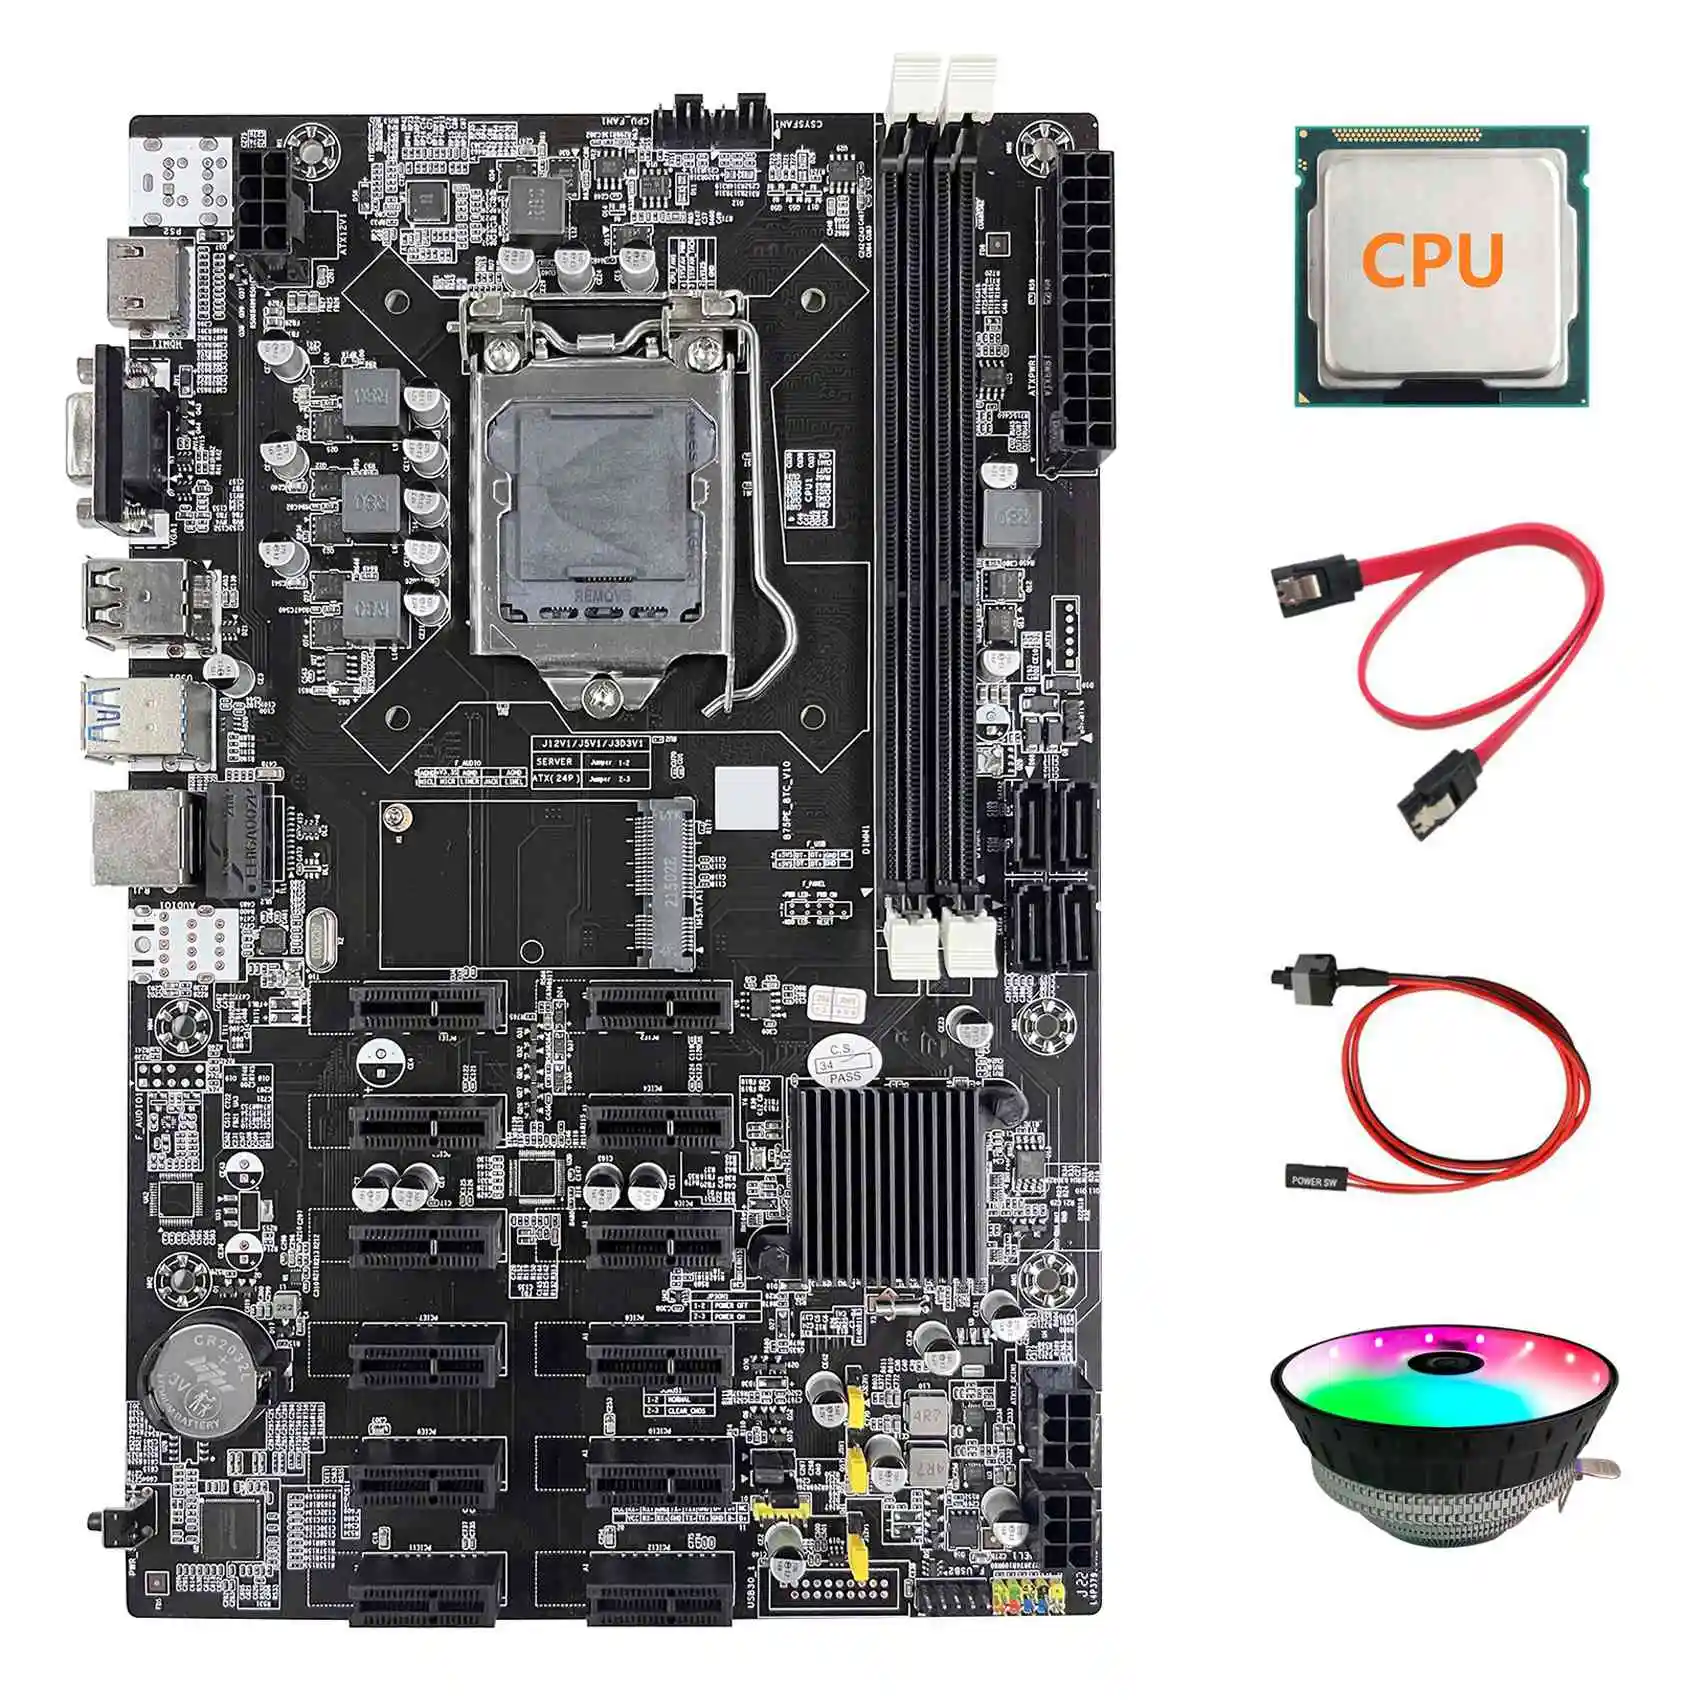 B75 12 PCIE ETH Mining Motherboard+Random CPU+Fan+SATA Cable+Switch Cable LGA1155 MSATA DDR3 B75 PCIE Miner Motherboard